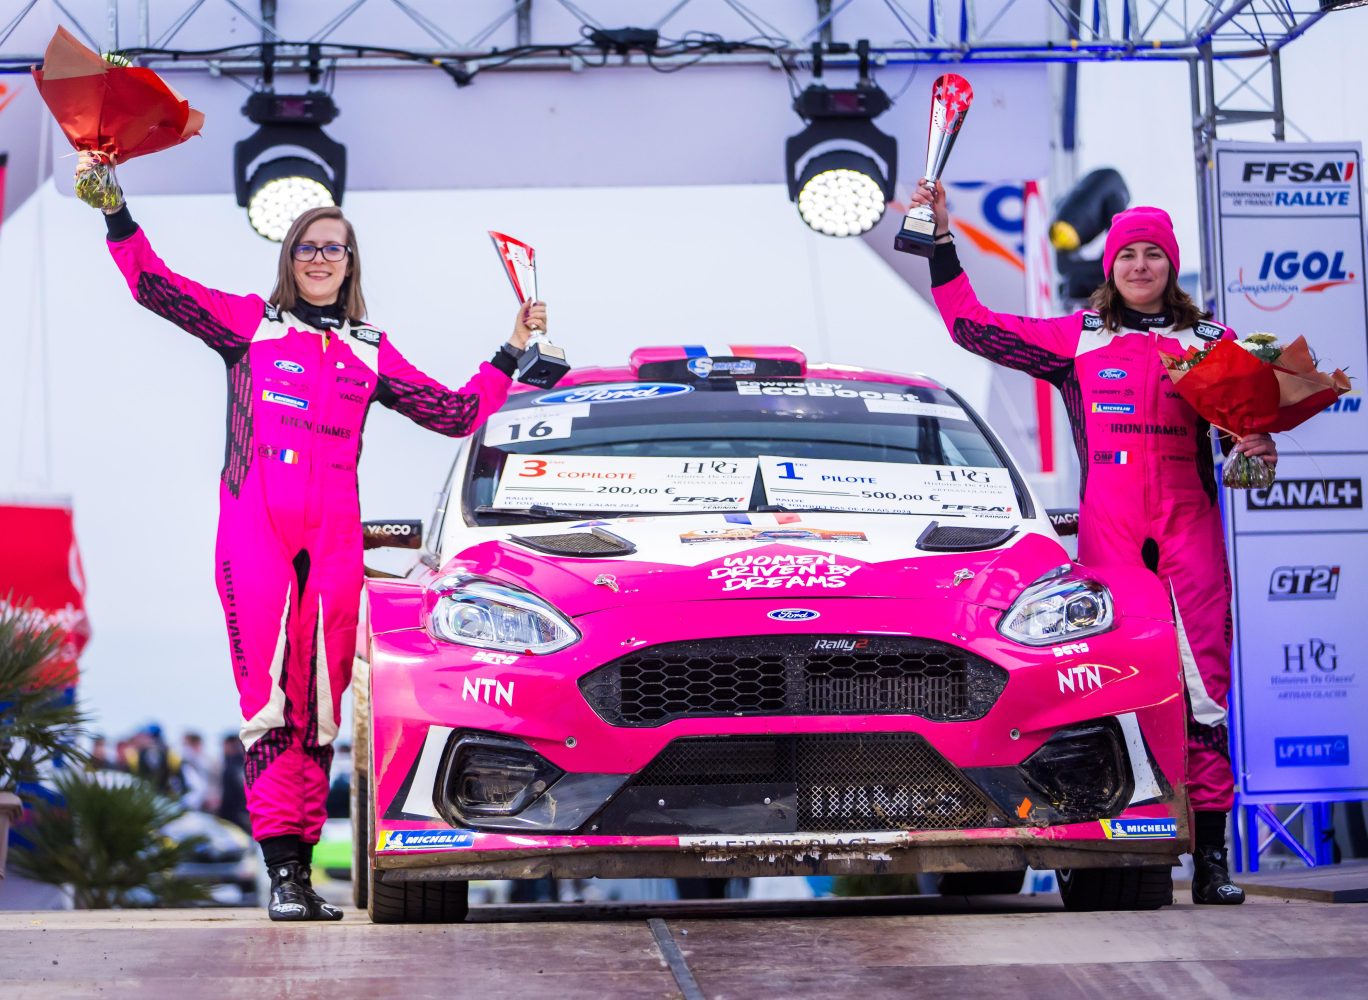 IRON DAMES EXPERIENCE A WEEKEND OF HIGHS AND LOWS ACROSS ENDURANCE RACING AND RALLYING